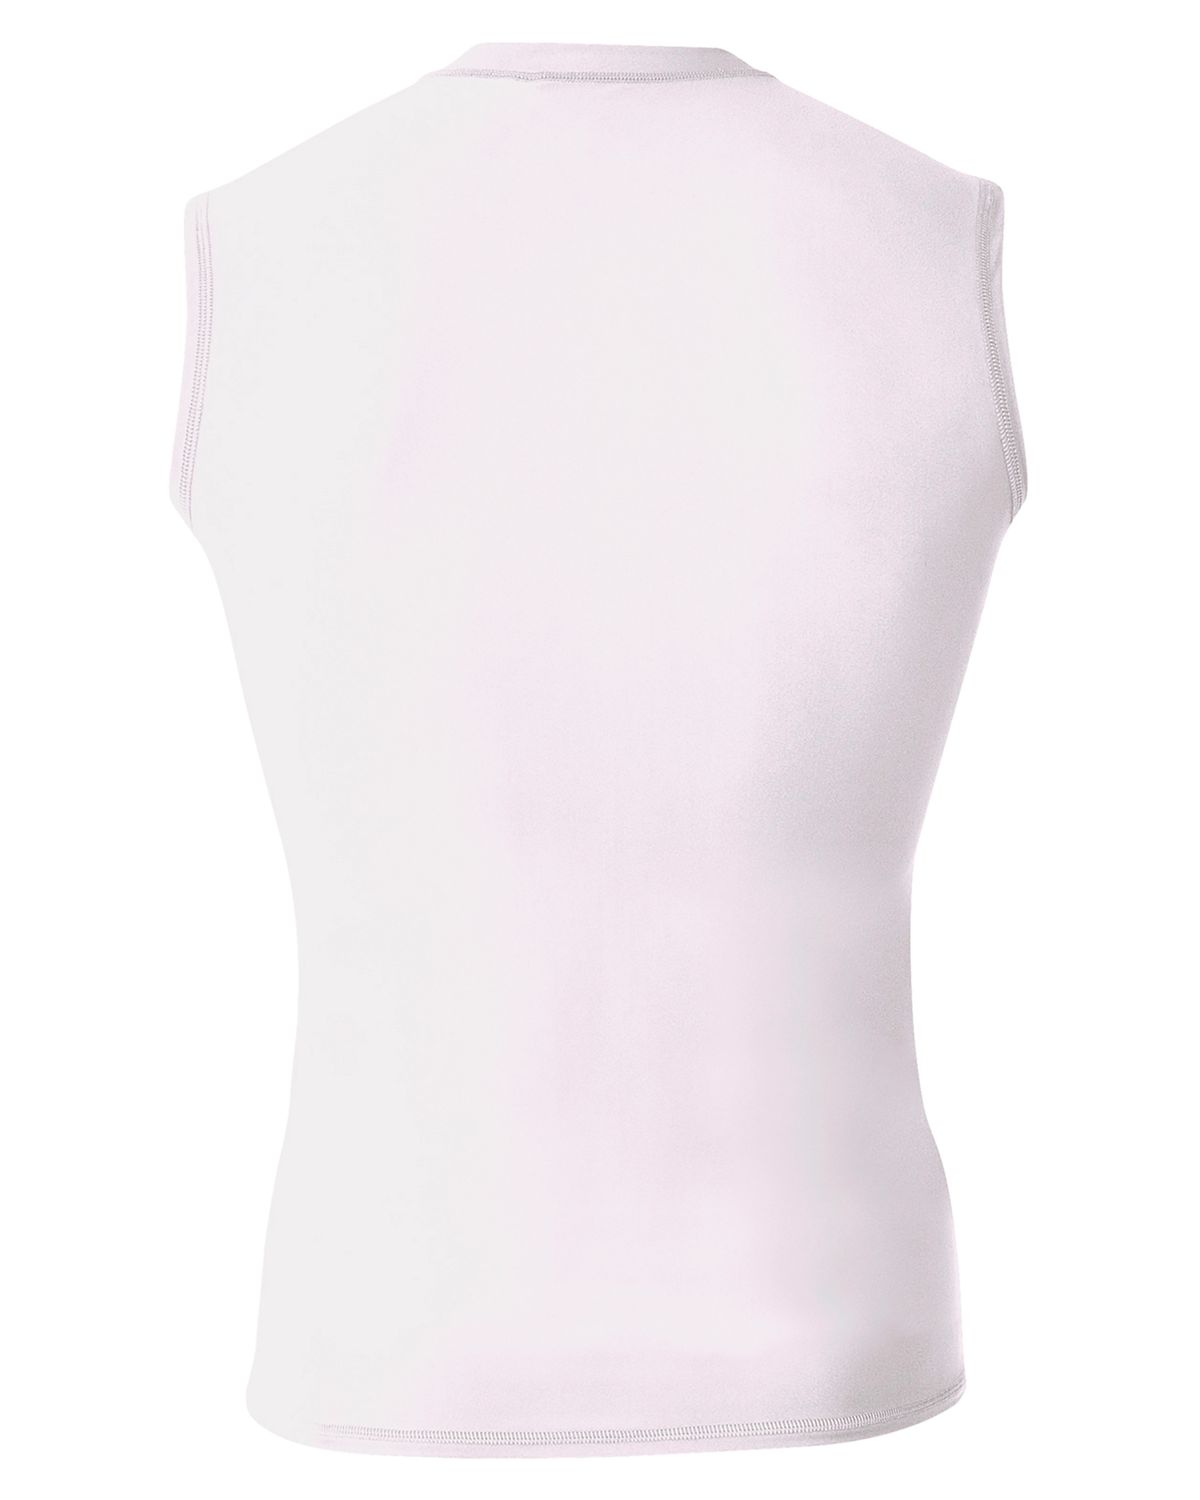 'A4 N2306 Men's Compression Muscle Shirt'